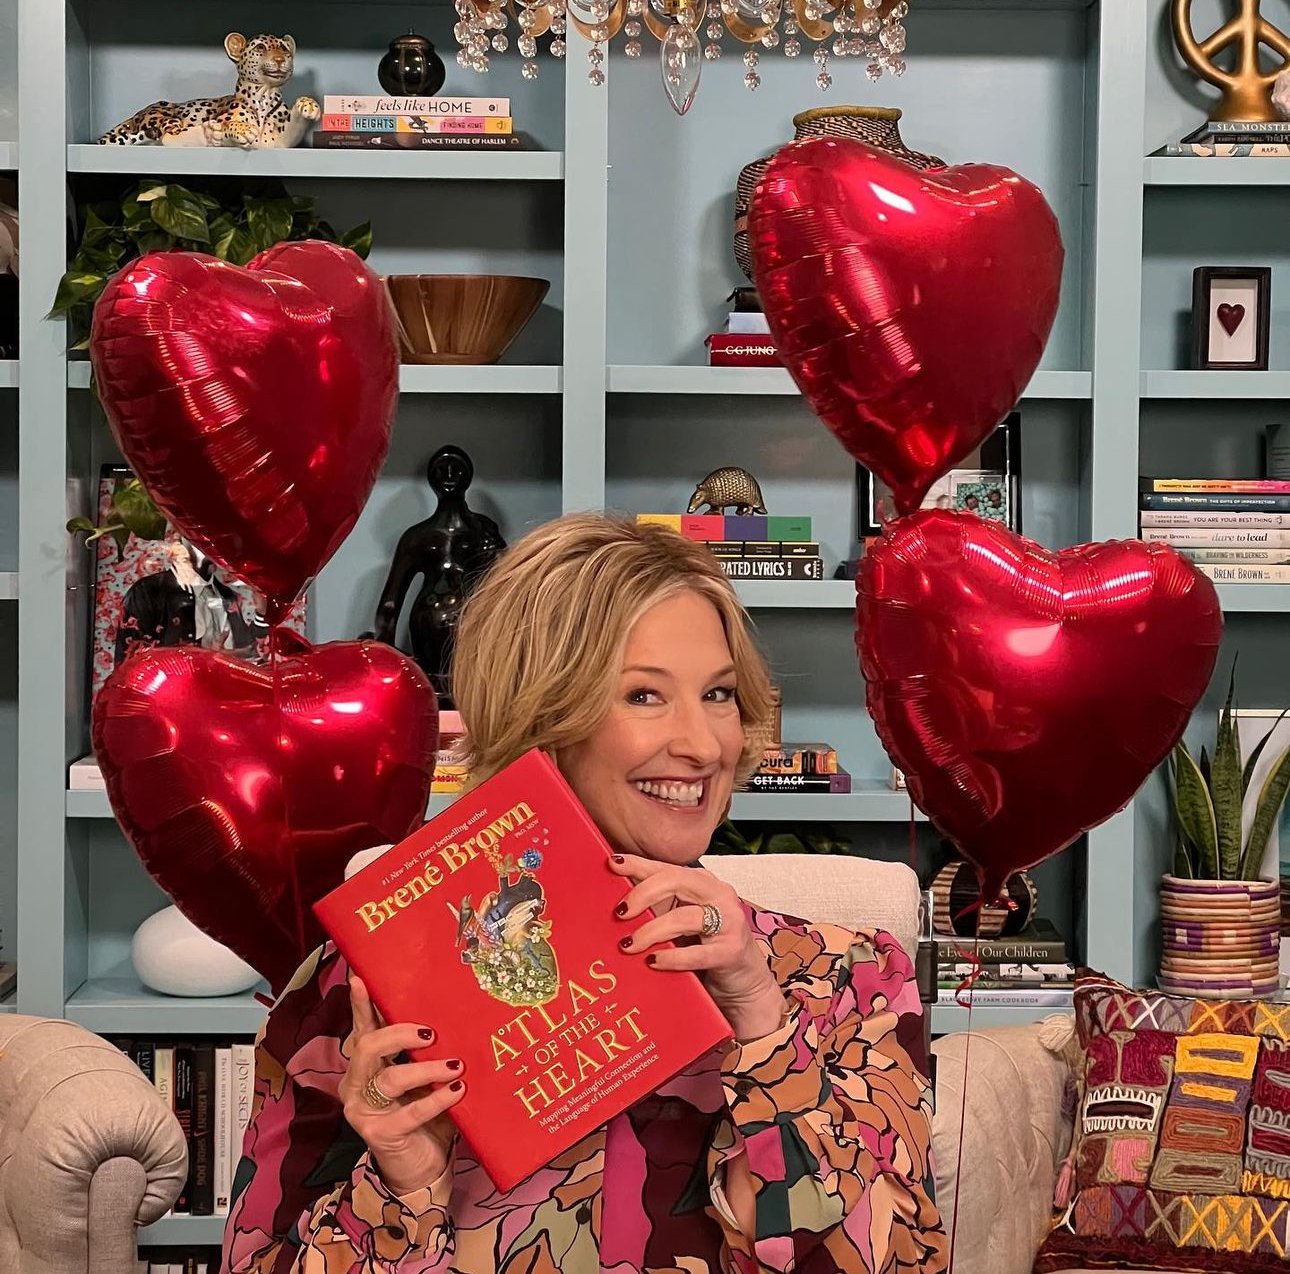 Brené Brown posing with one of her books, "Atlas of The Heart"